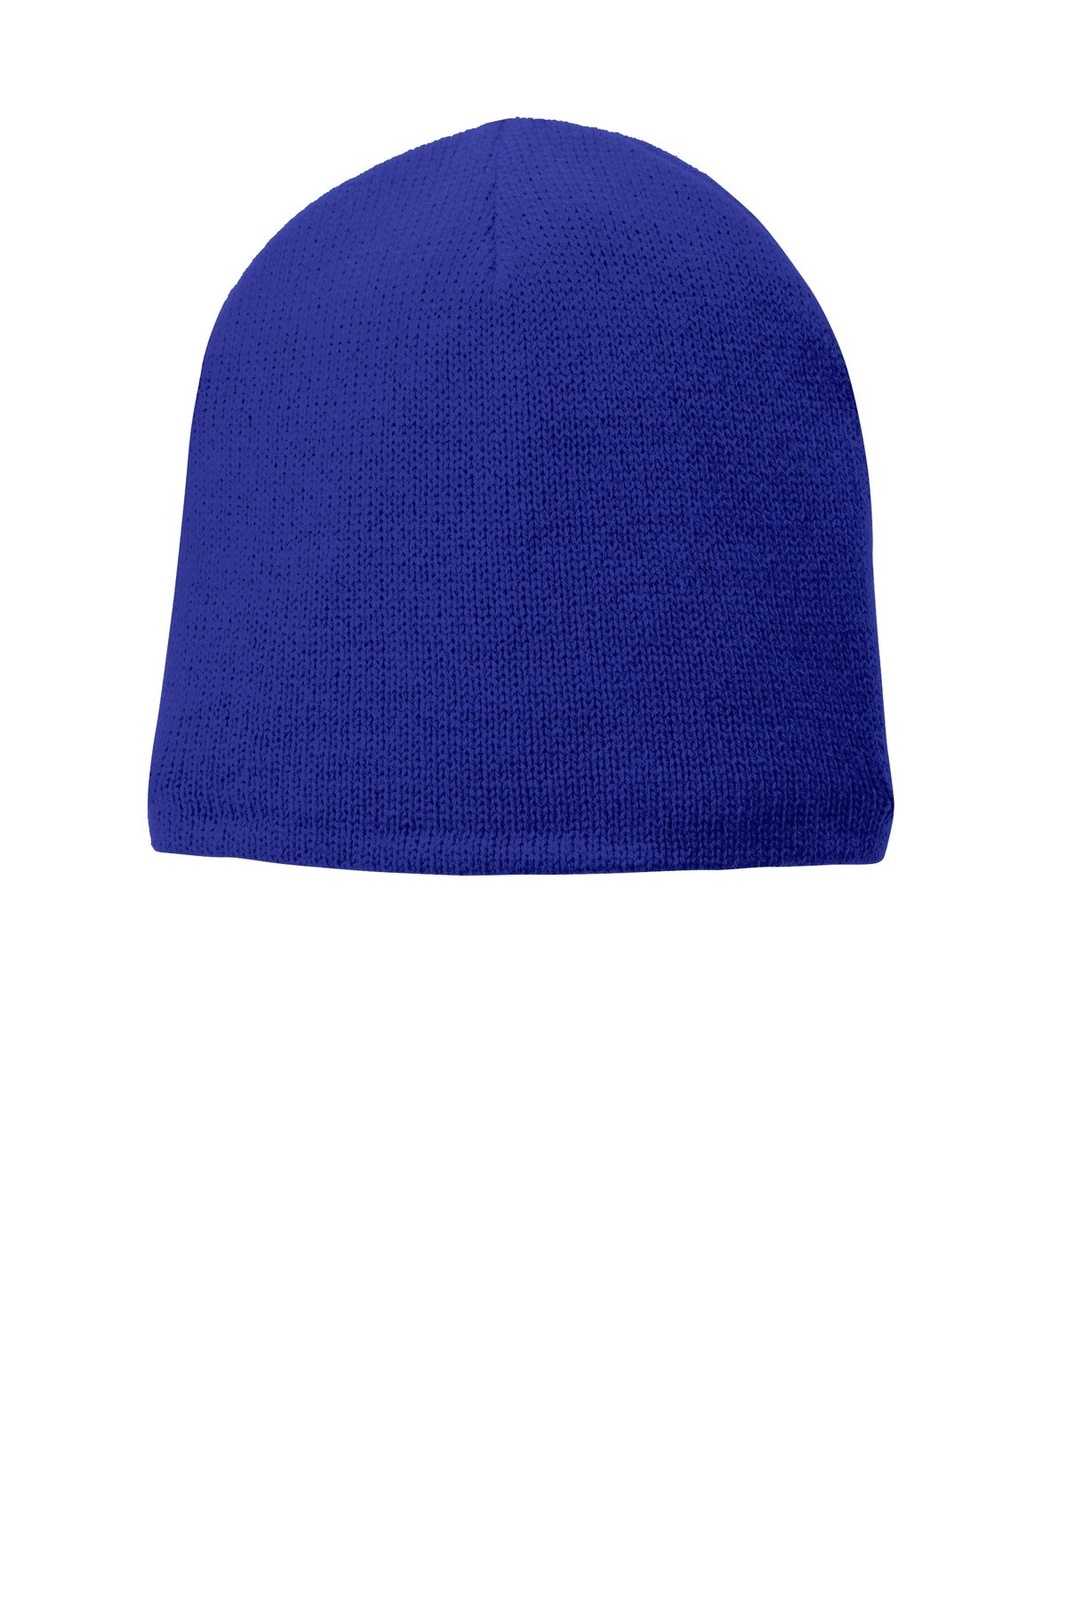 Port & Company CP91L Fleece-Lined Beanie Cap - Athletic Royal - HIT a Double - 1